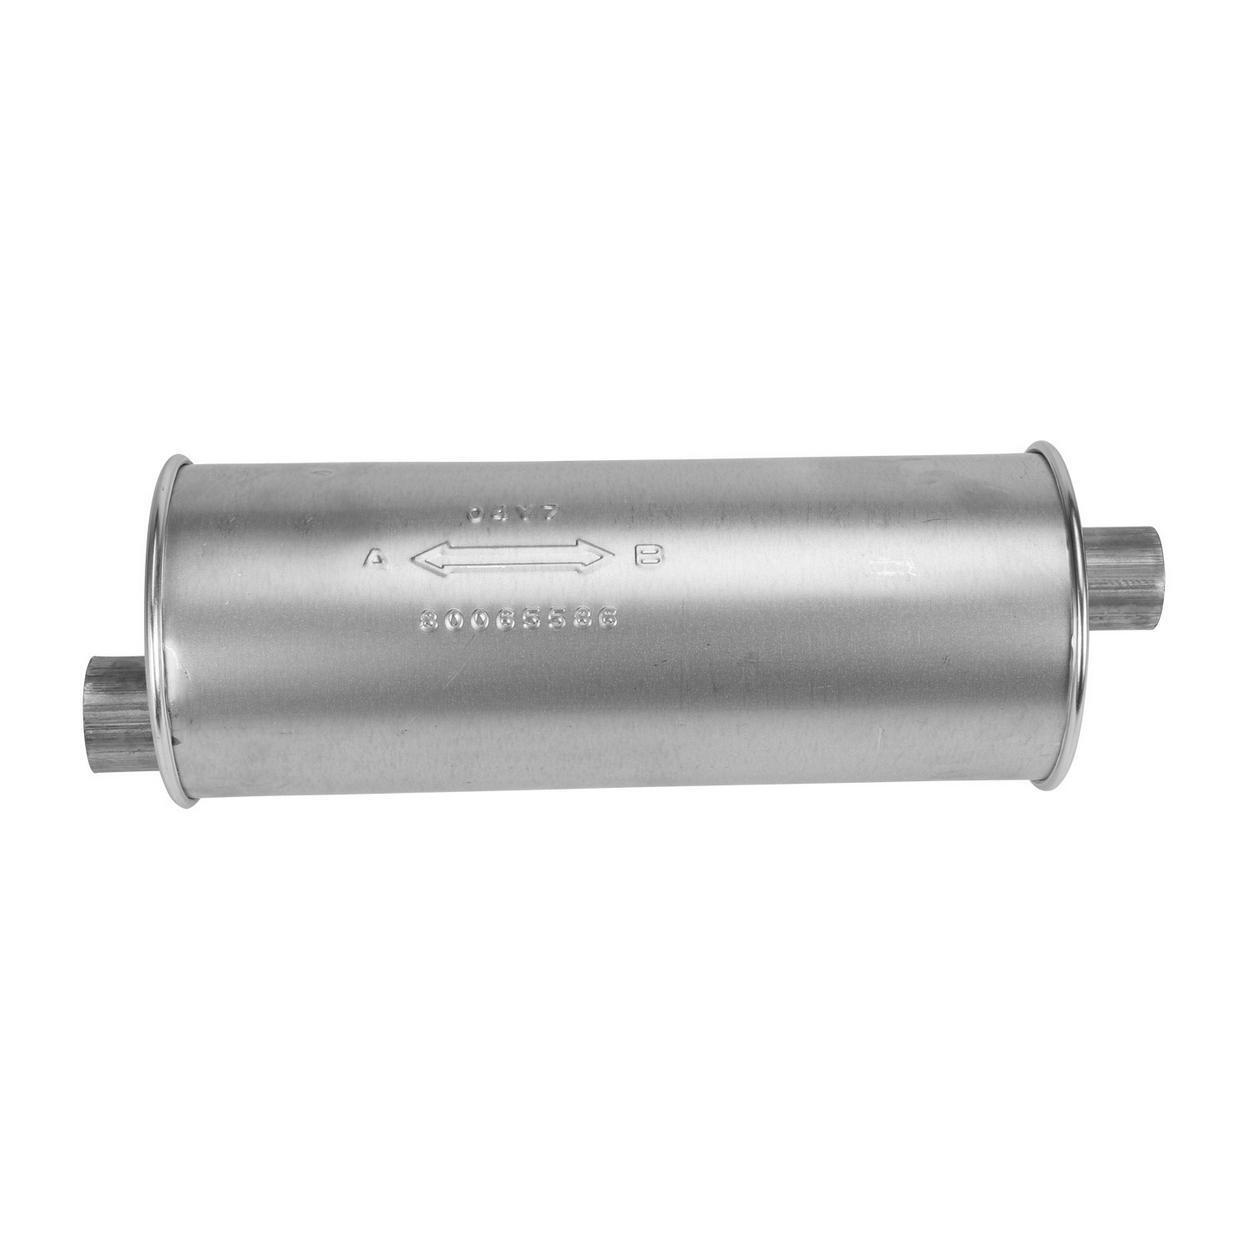 6558-BE Exhaust Muffler Fits 1987-1990 Ford Tempo AWD